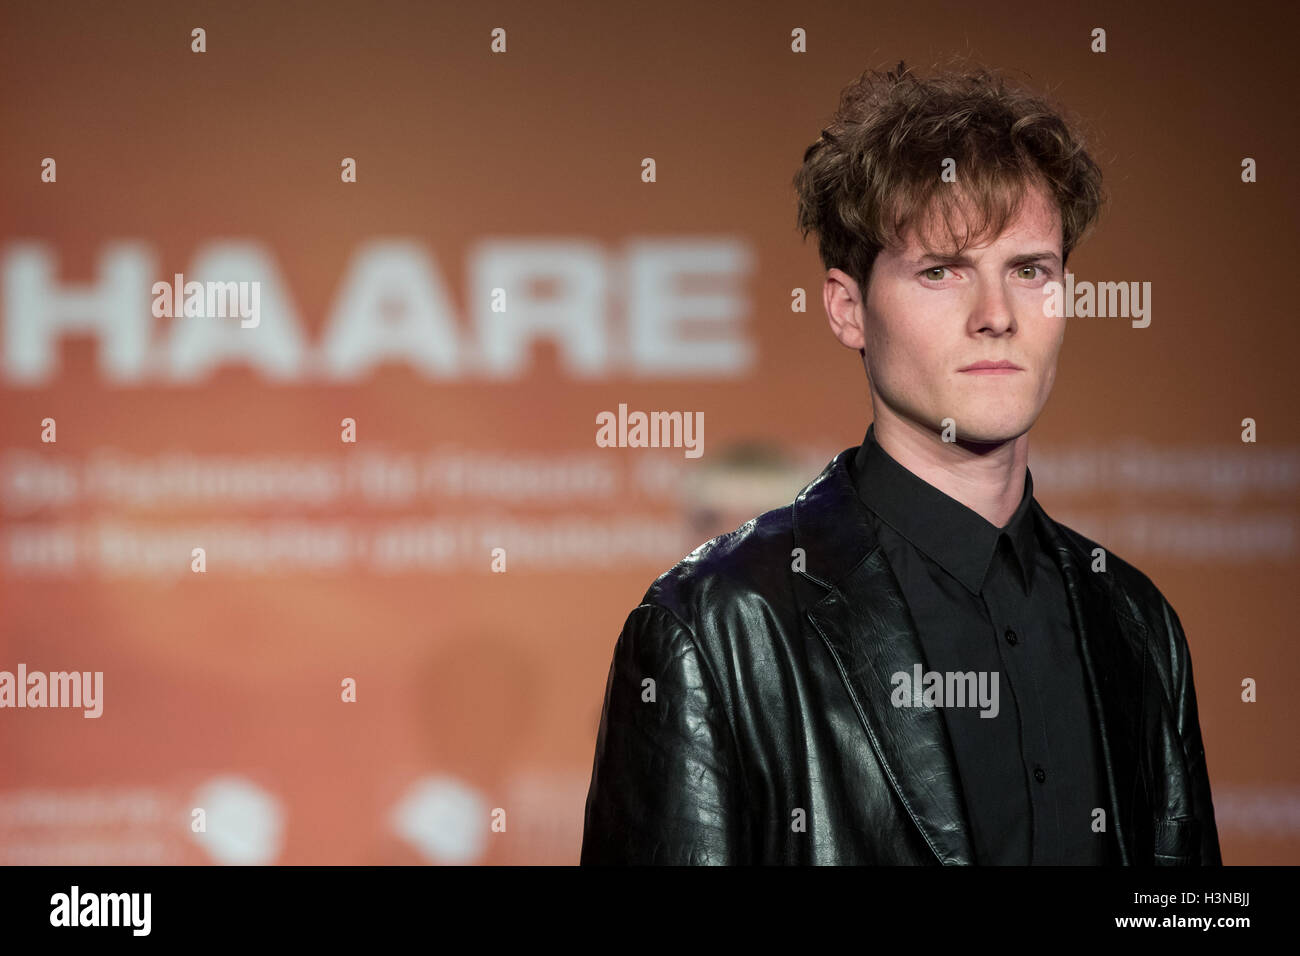 Nuremberg, Germany. 10th Oct, 2016. Model Janek presents a hairstyle trend for Autumn and Winter 2016 at the trade fair 'Haare 2016' in Nuremberg, Germany, 10 October 2016. Photo: DANIEL KARMANN/dpa/Alamy Live News Stock Photo